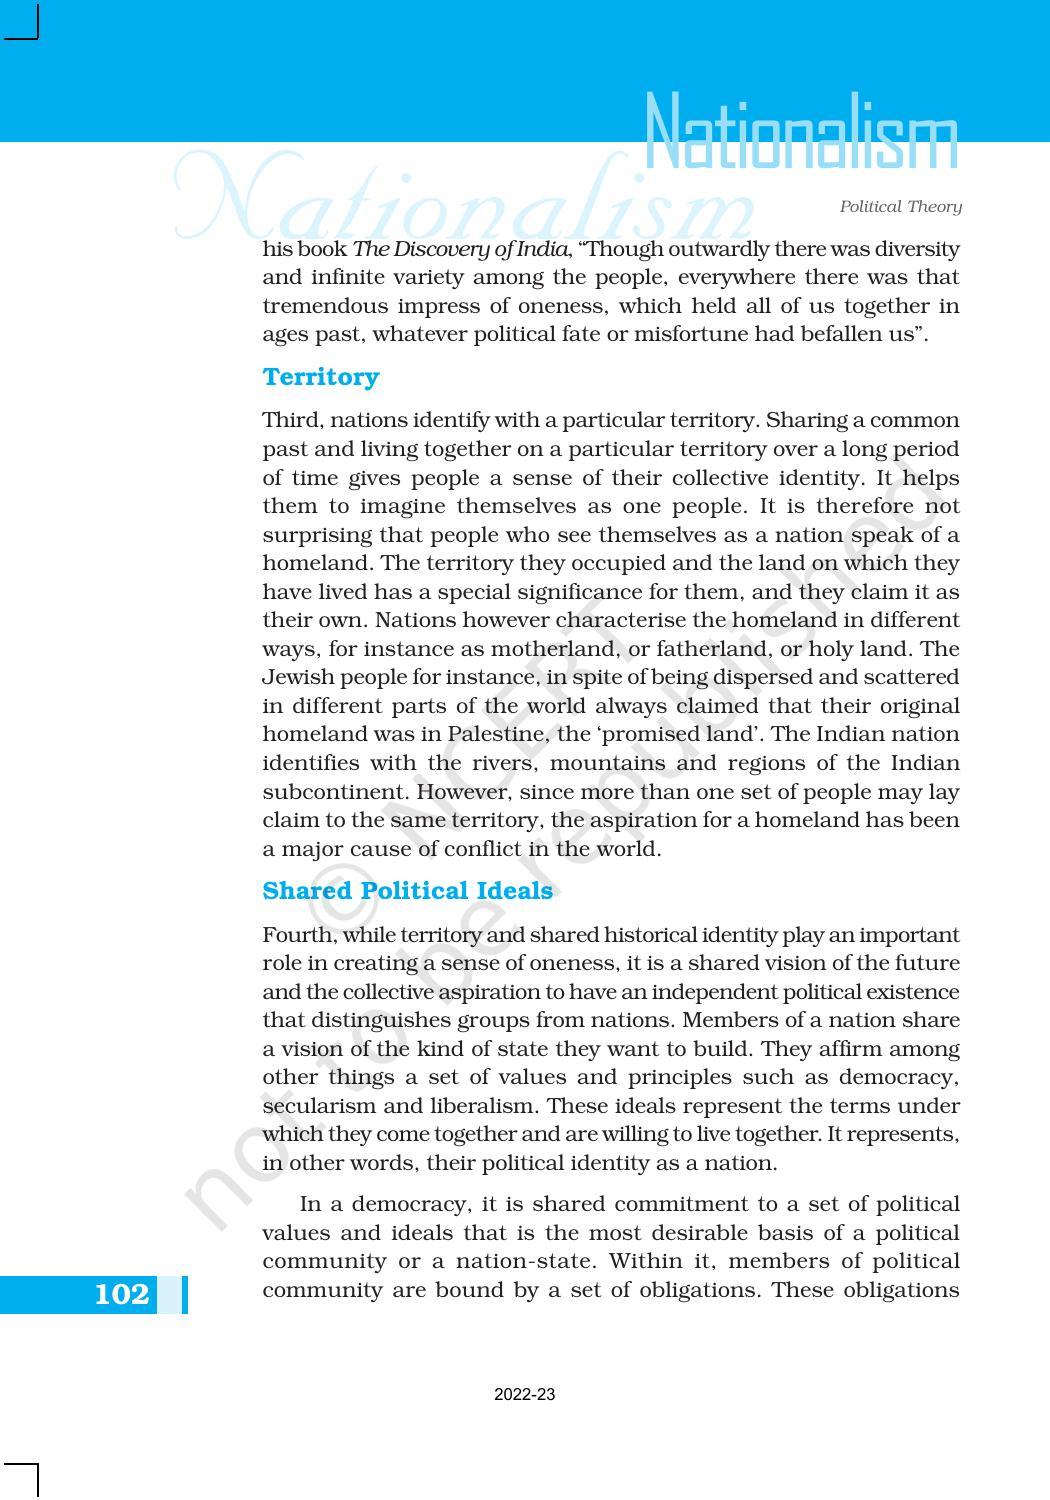 NCERT Book for Class 11 Political Science (Political Theory) Chapter 7 Nationalism - Page 6